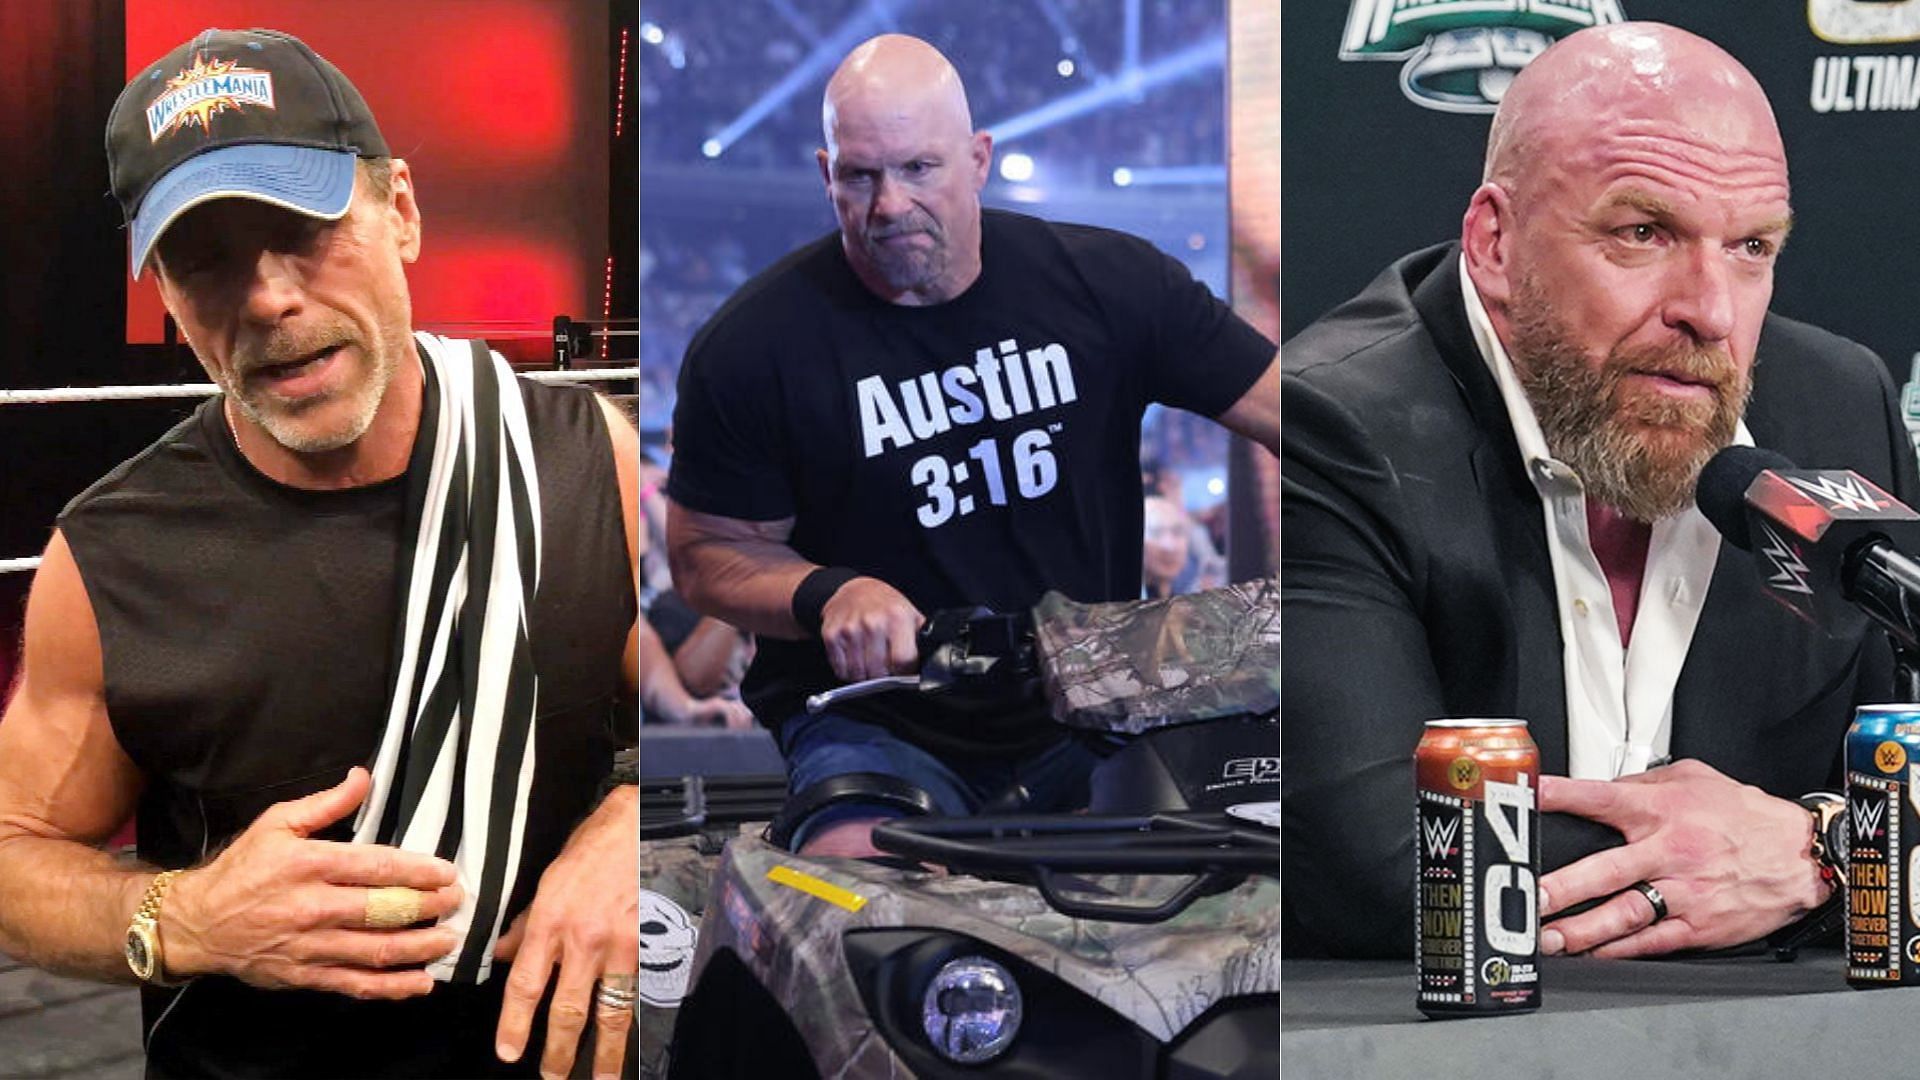 Left to right: Shawn Michaels, Steve Austin, and Triple H